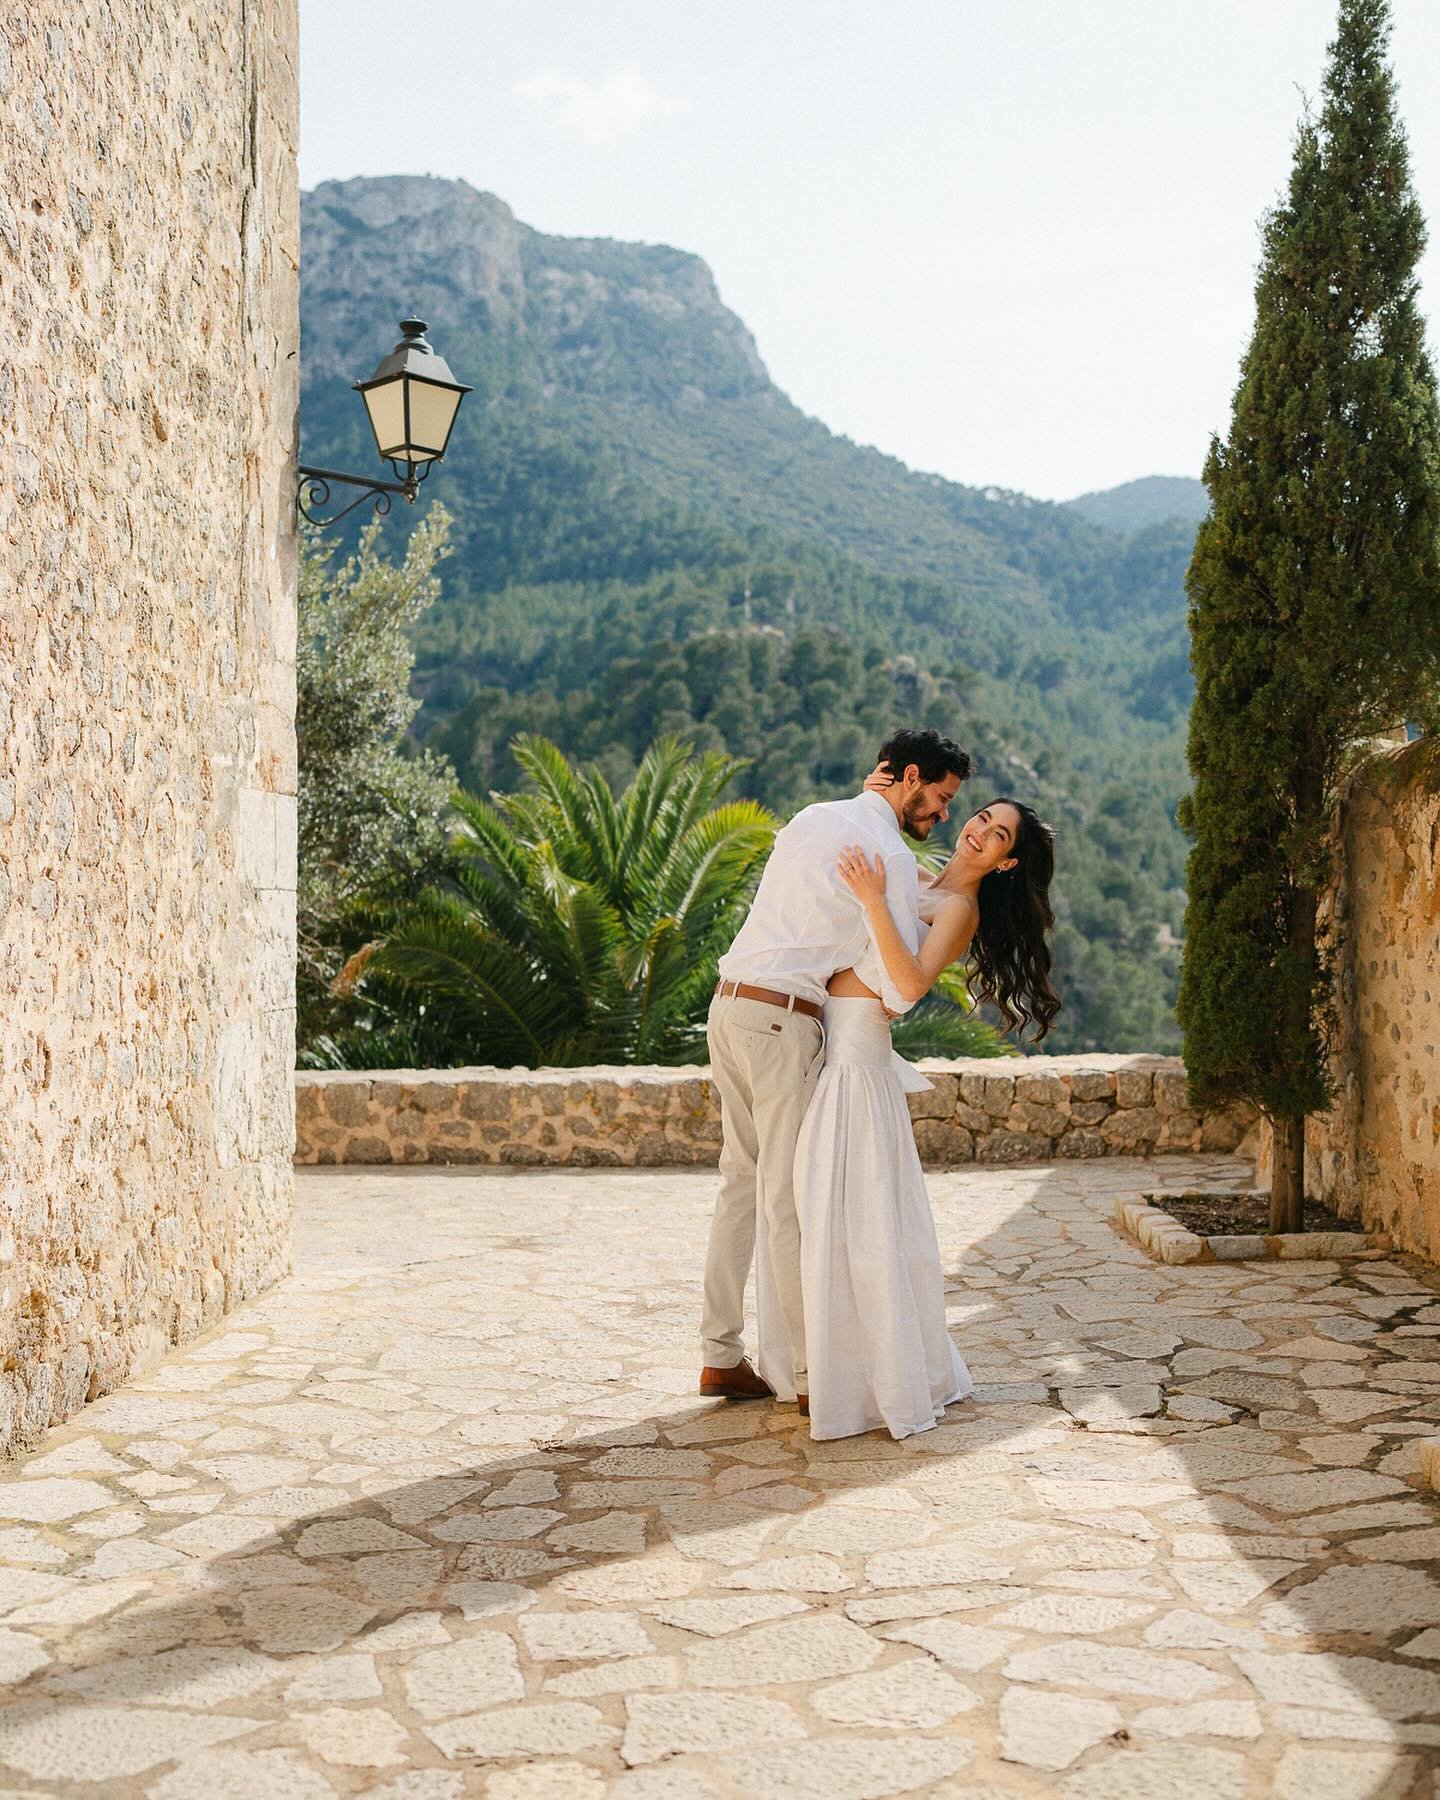 Last week we got lost in the charm of Dei&agrave;, Mallorca, where every corner looks like a chapter in a timeless romance novel. My photographer heart felt like it was daydreaming!

Couple: @themodelcouple.mallorca 
Dress: @annewolf.couture 
Hair &a